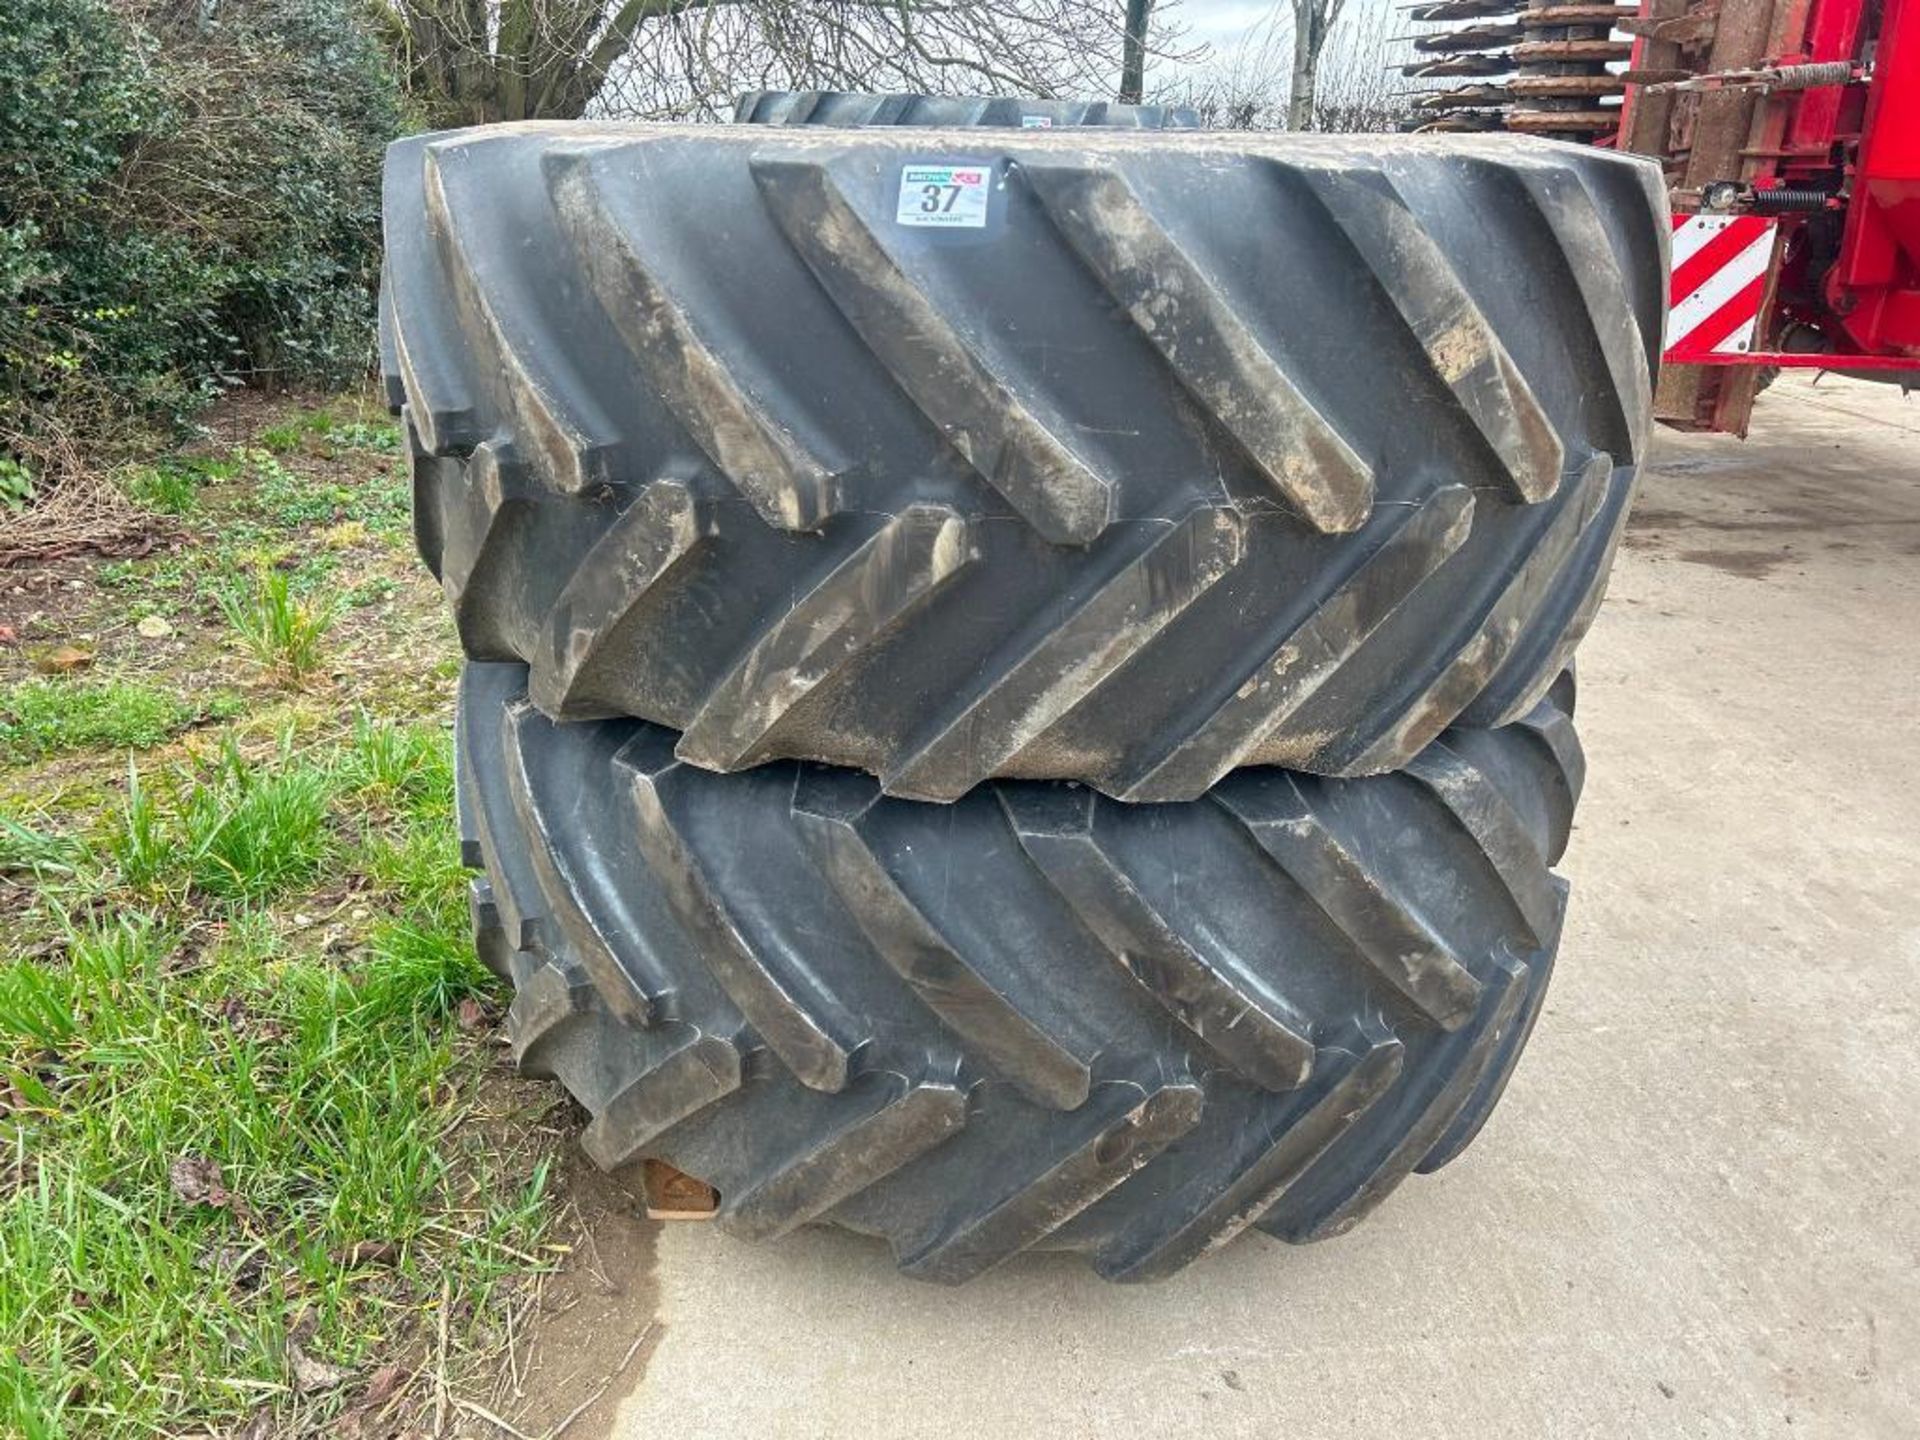 2No Michelin AxioBib 650/65R34 tyres to fit Fendt 900.